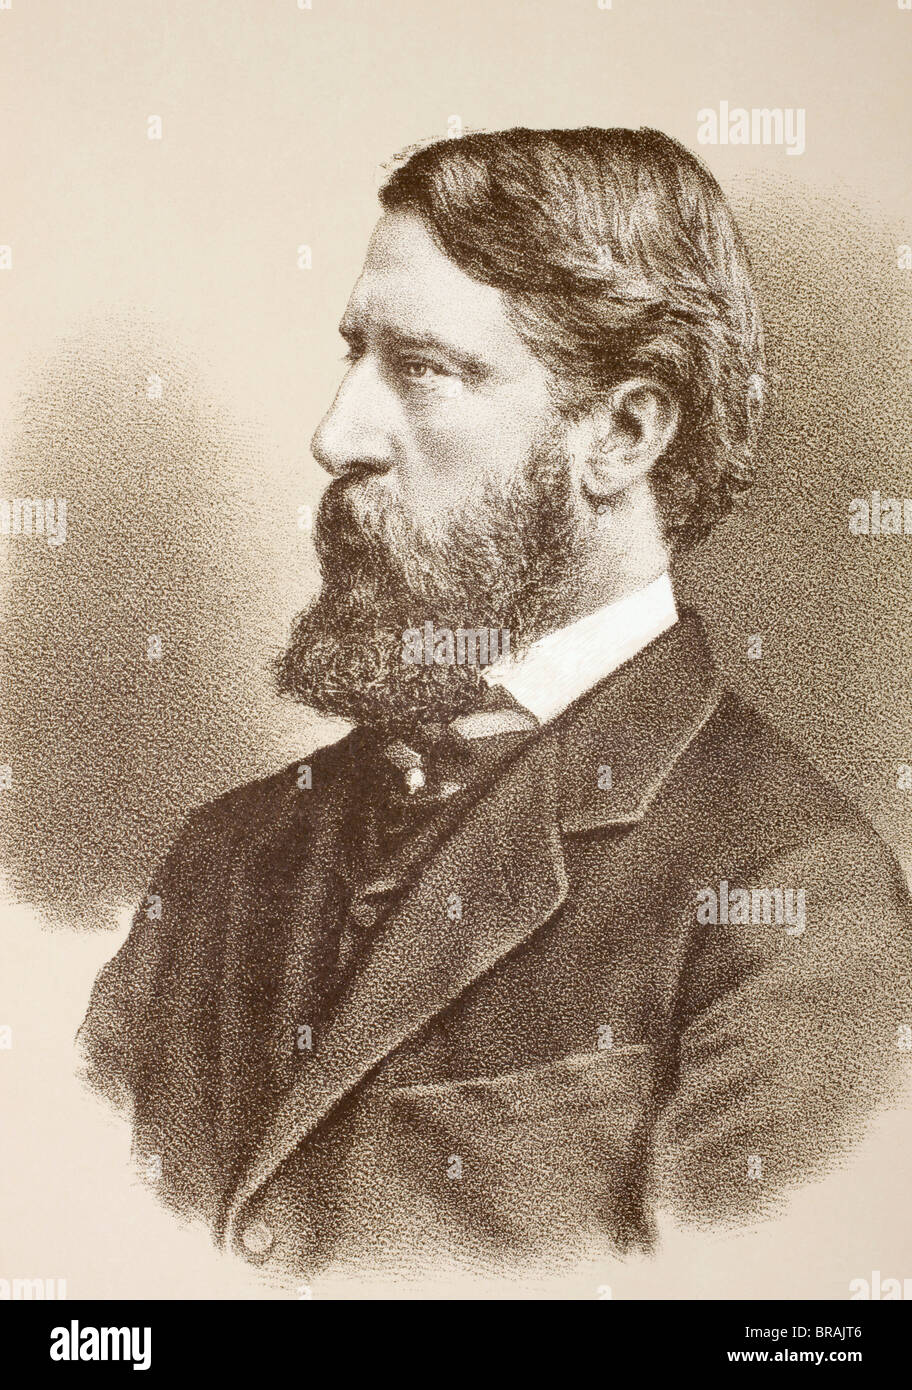 Spencer Compton Cavendish, 8th Duke of Devonshire, 1833 to1908. British statesman and leader of the Liberal Party 1875 – 1880. Stock Photo